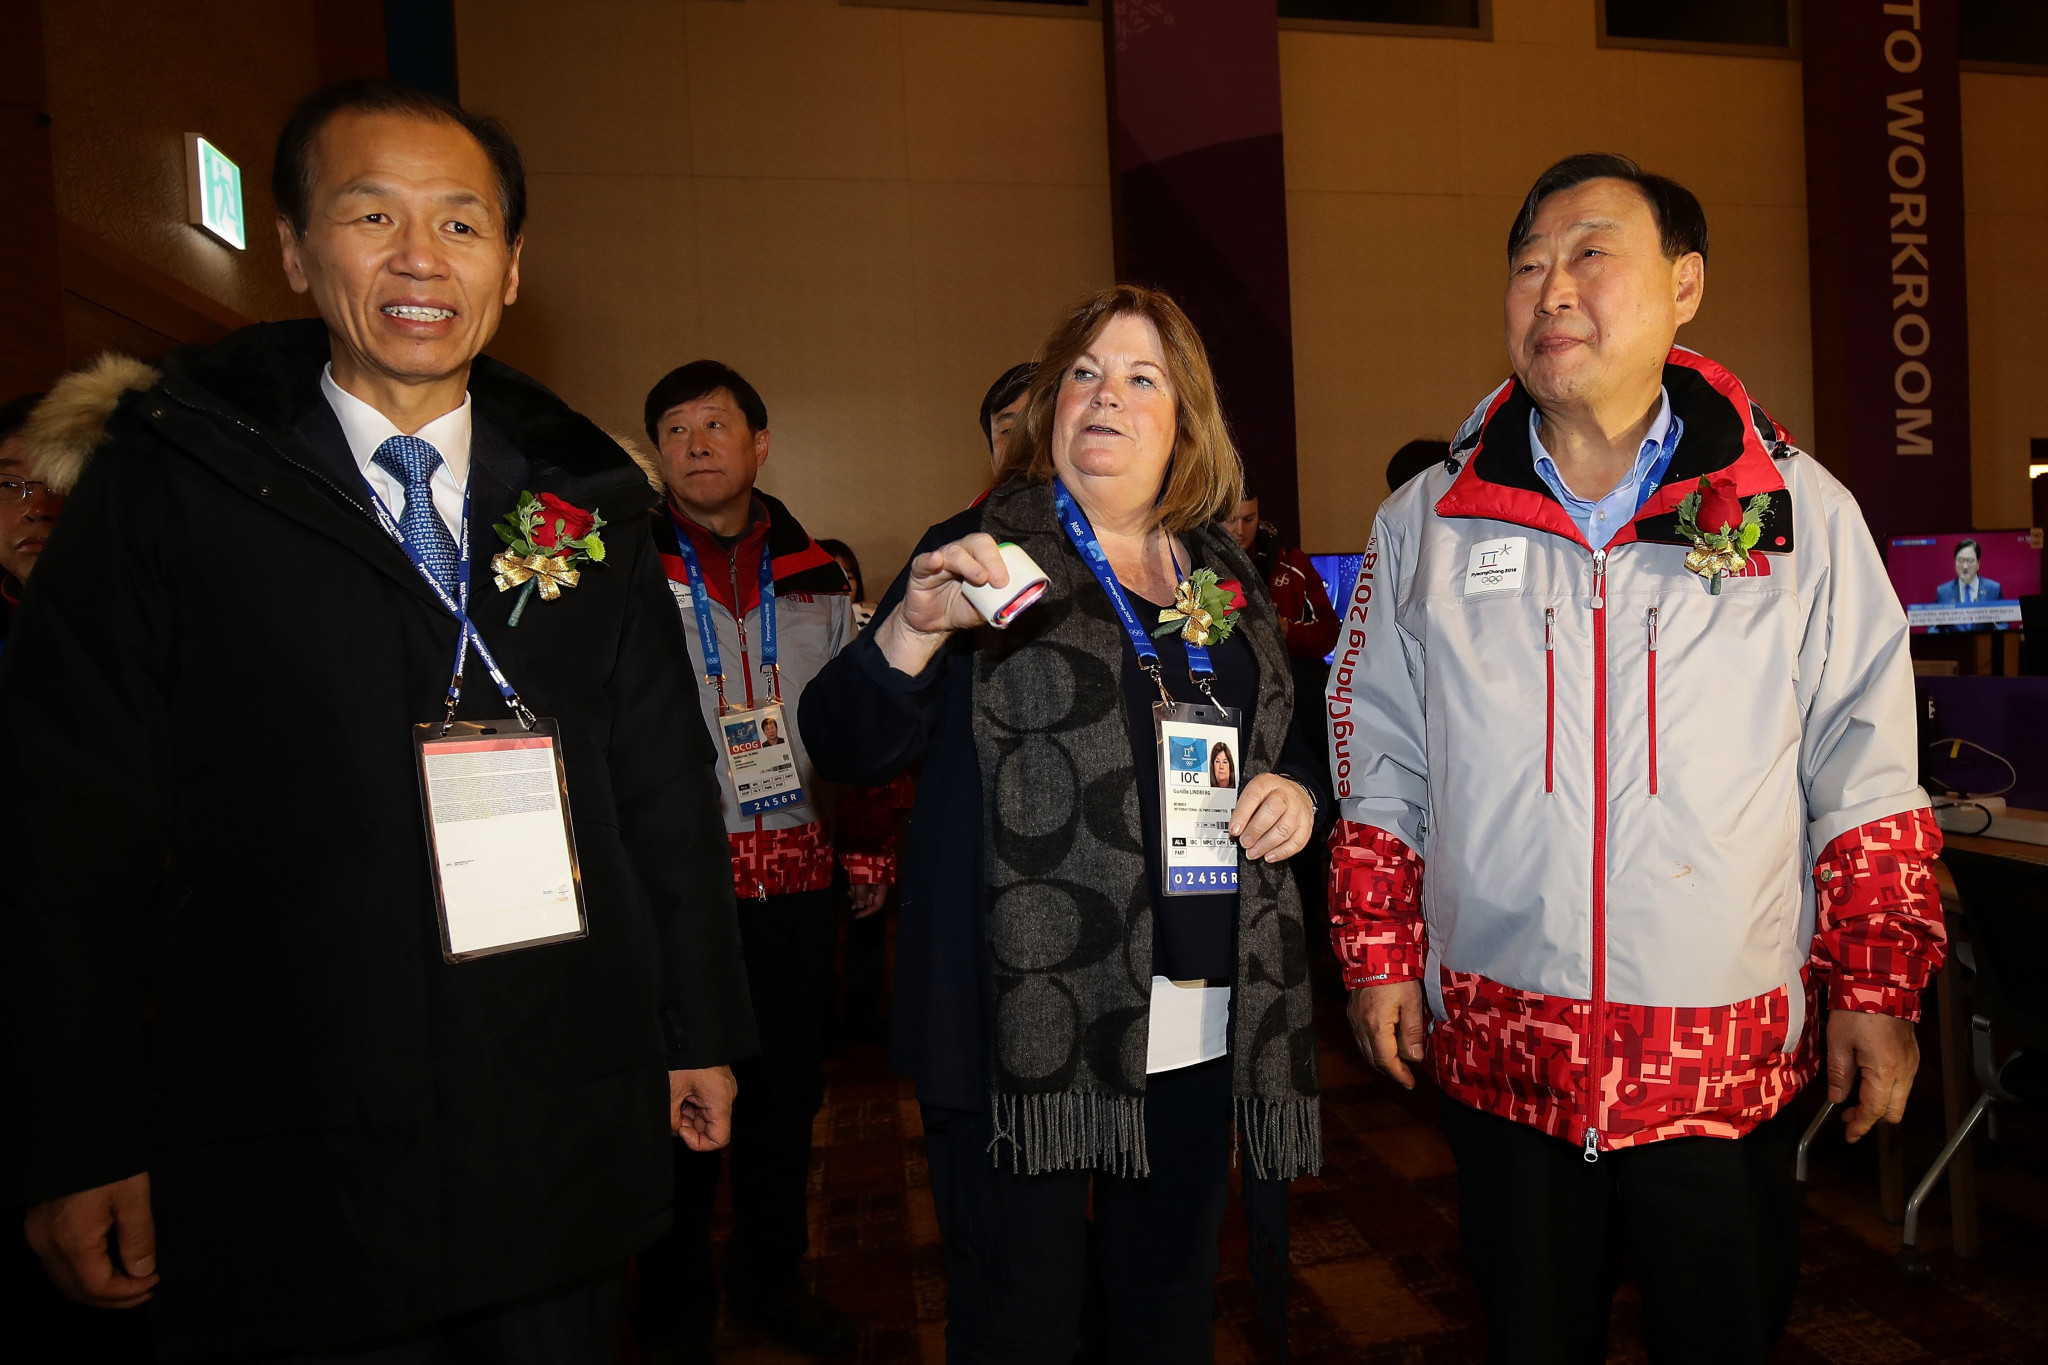 Gangwon Province Governor Choi Moon-soon, pictured left alongside IOC Executive Board member Gunilla Lindberg and Pyeongchang 2018 President Lee Hee-beom, has announced a feasibility review on a bid for the 2021 Asian Winter Games will start after the Winter Olympics ©Getty Images